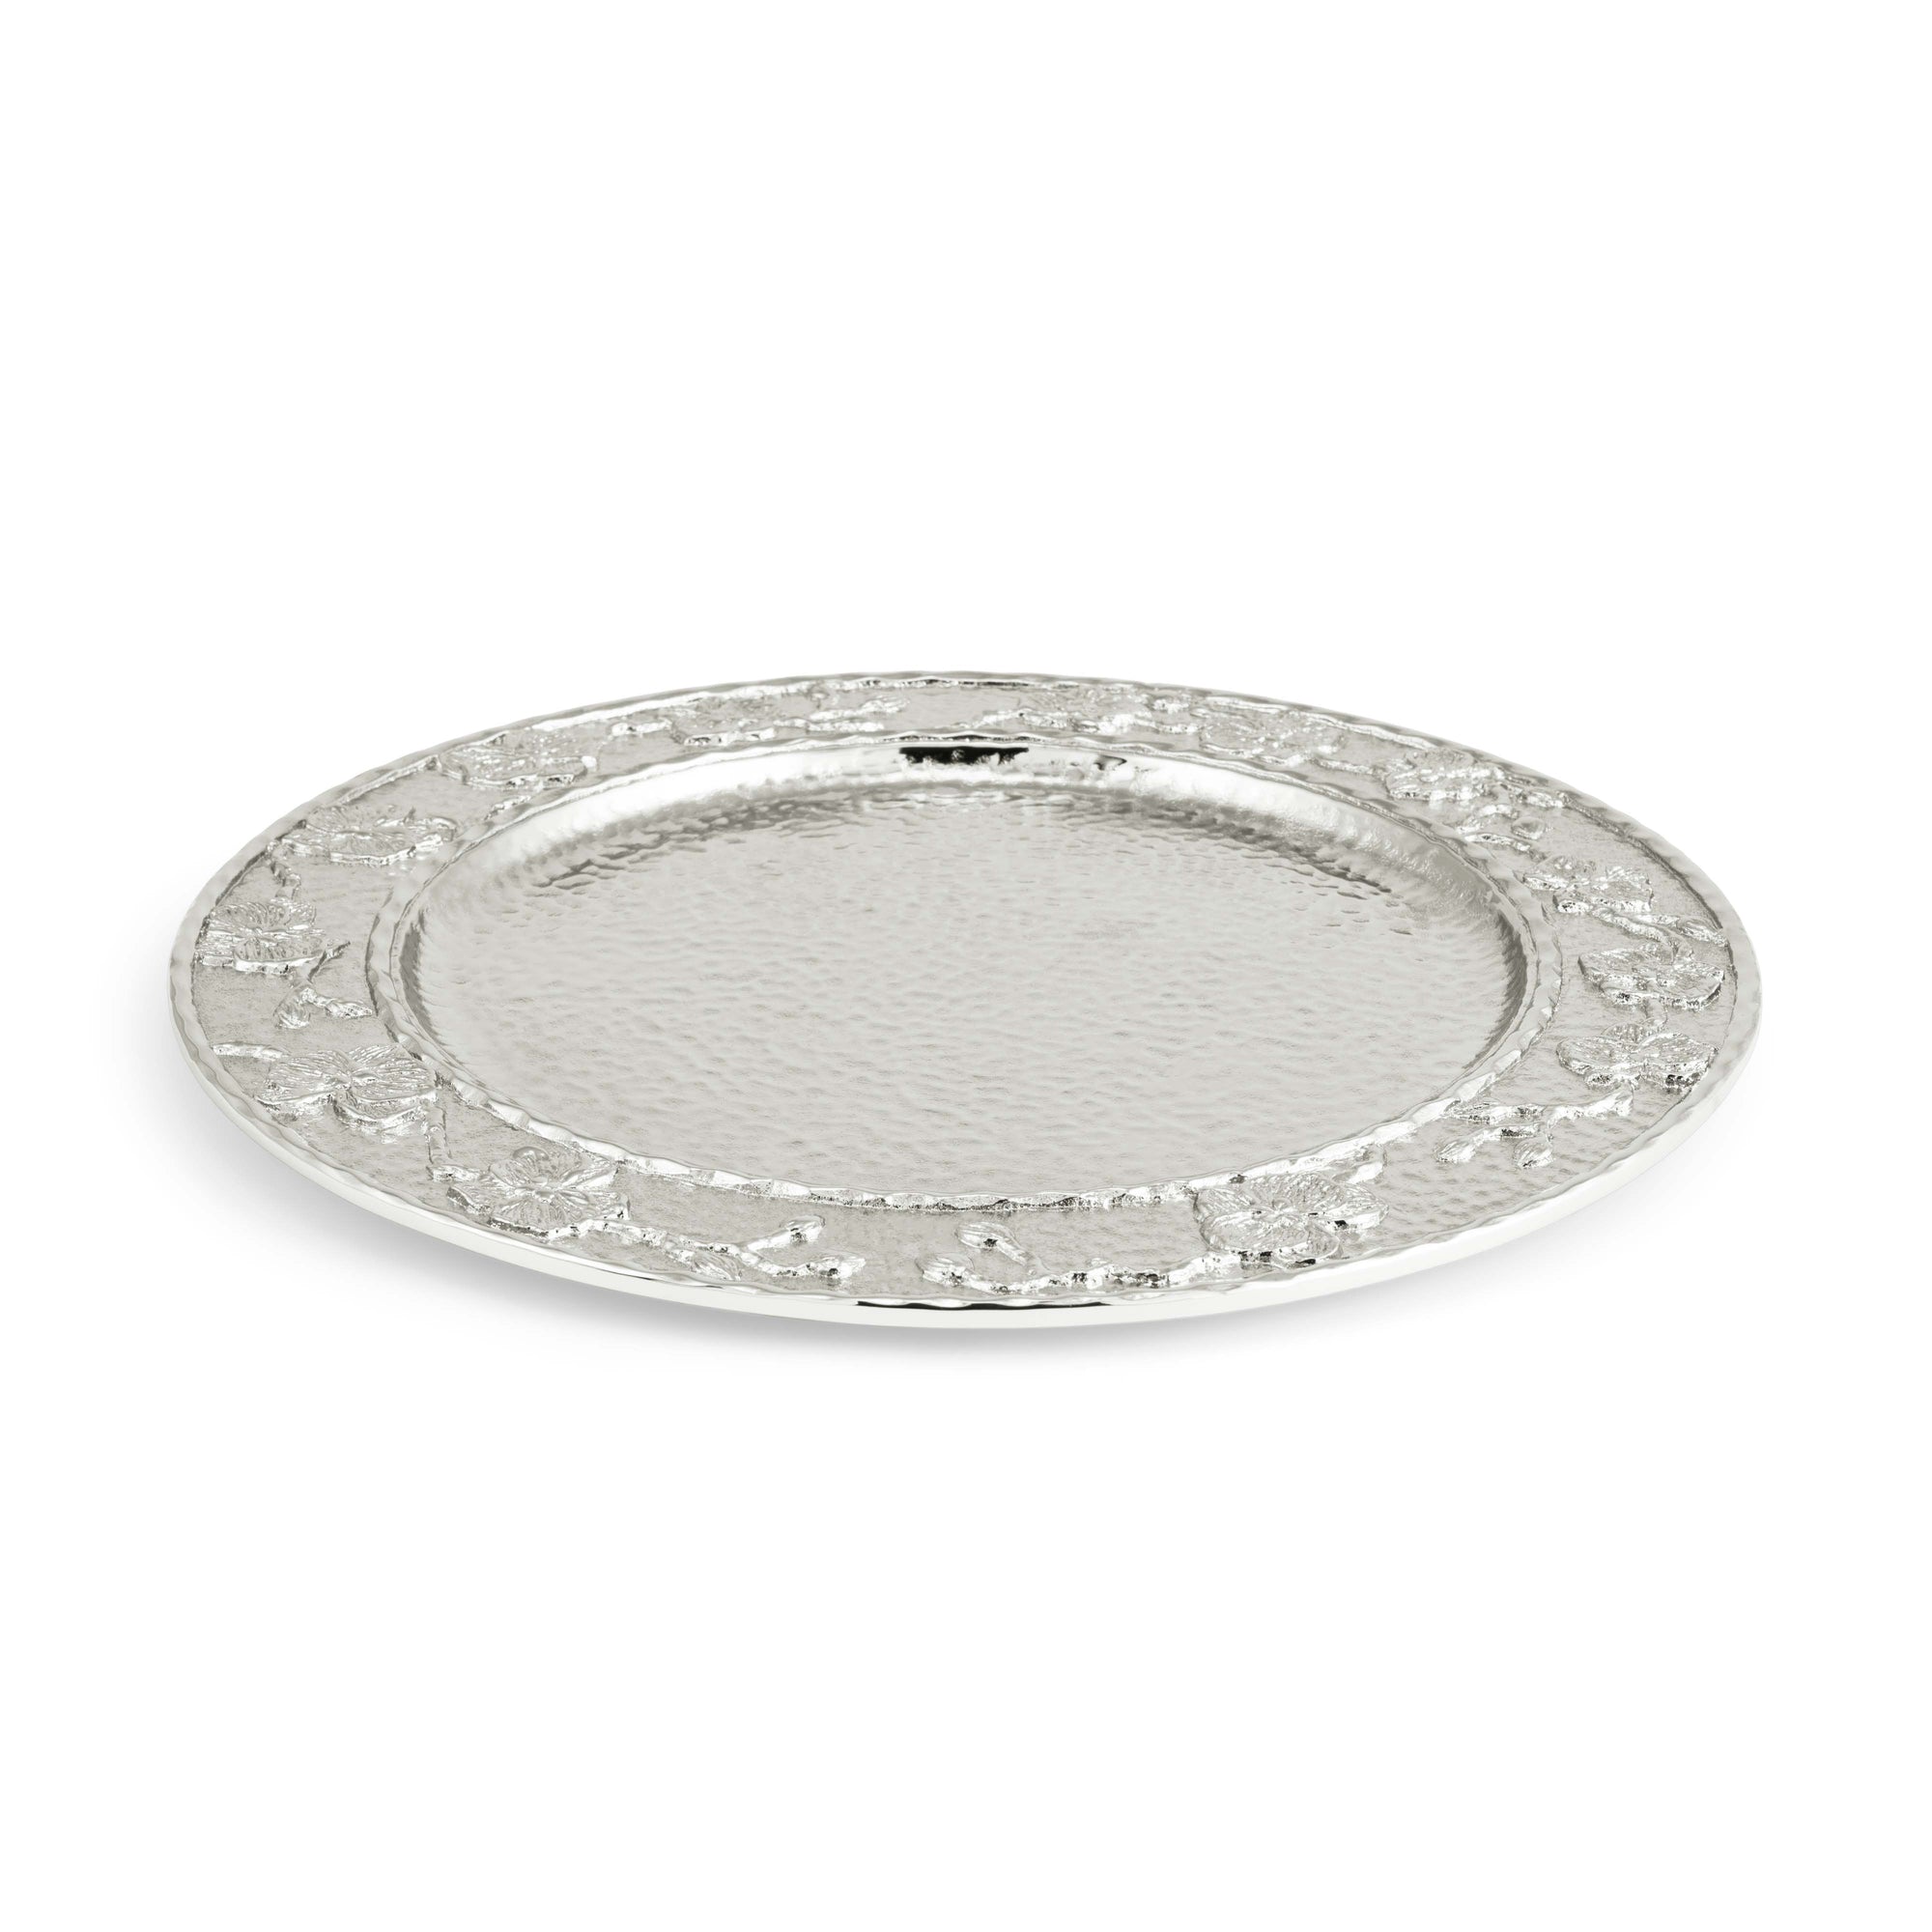 Michael Aram White Orchid Charger Plate